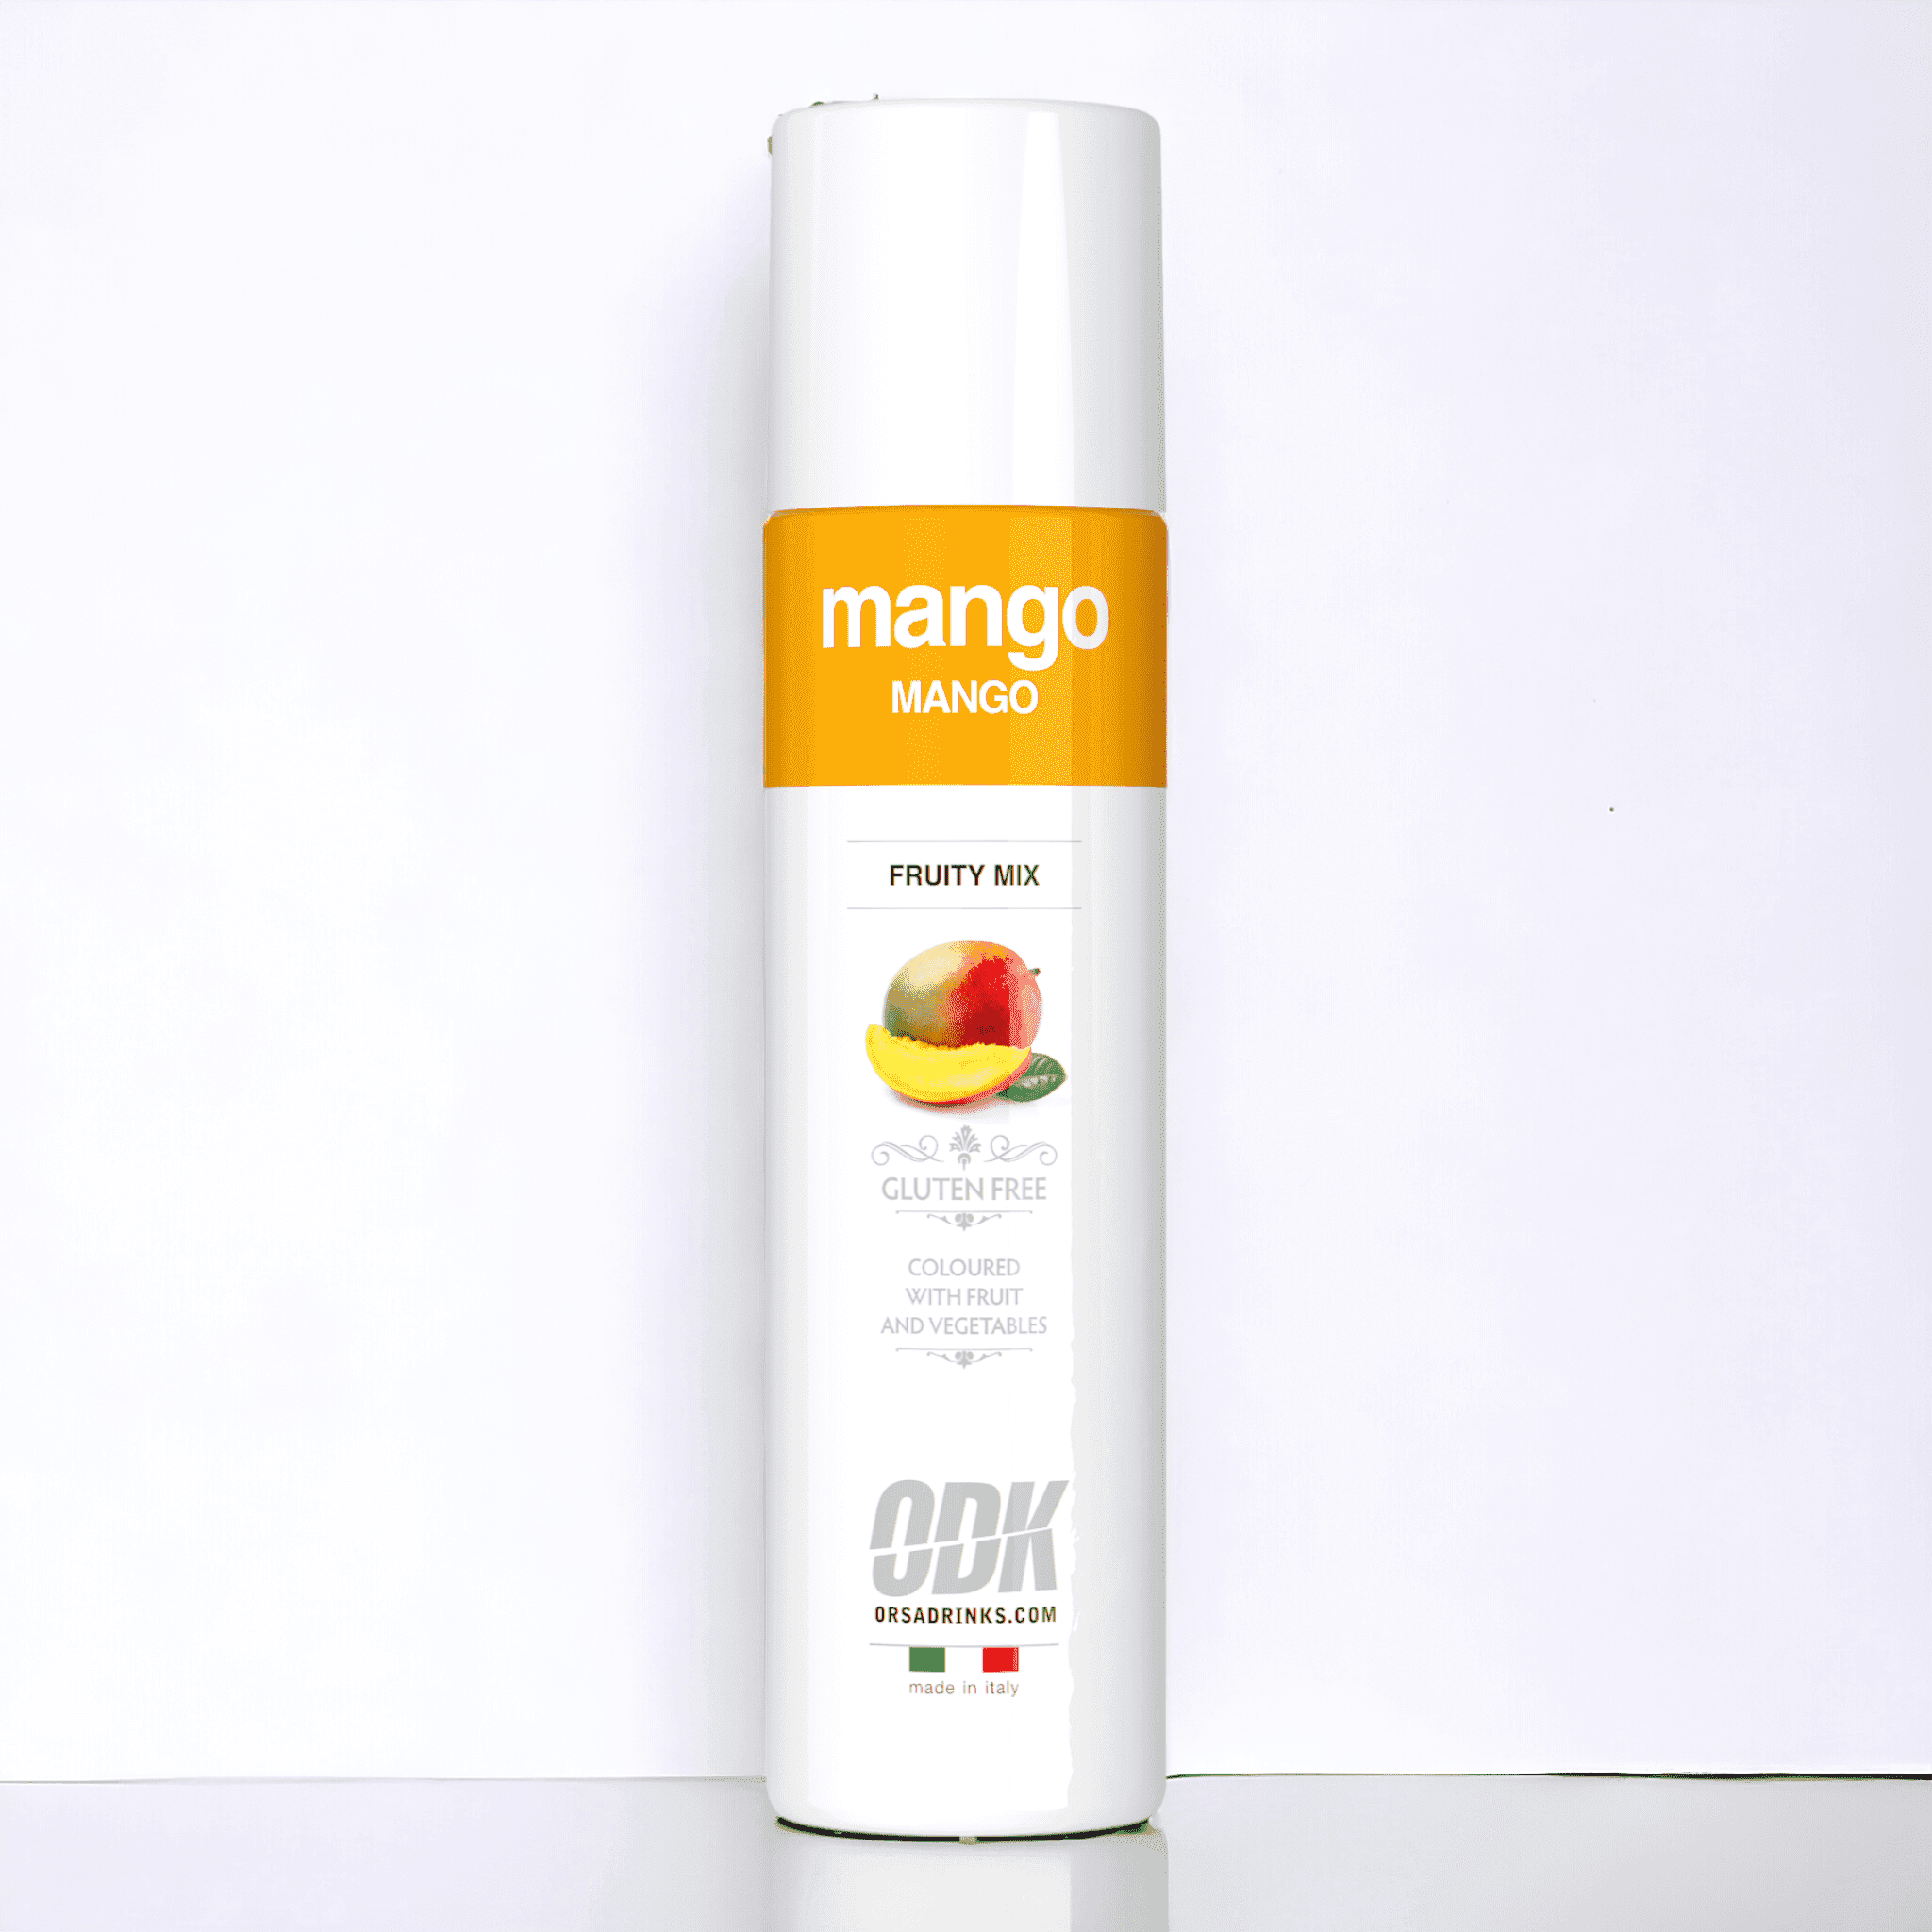 ODK Mango Fruity Mix 75 cl - Anbefales til Gin Hass